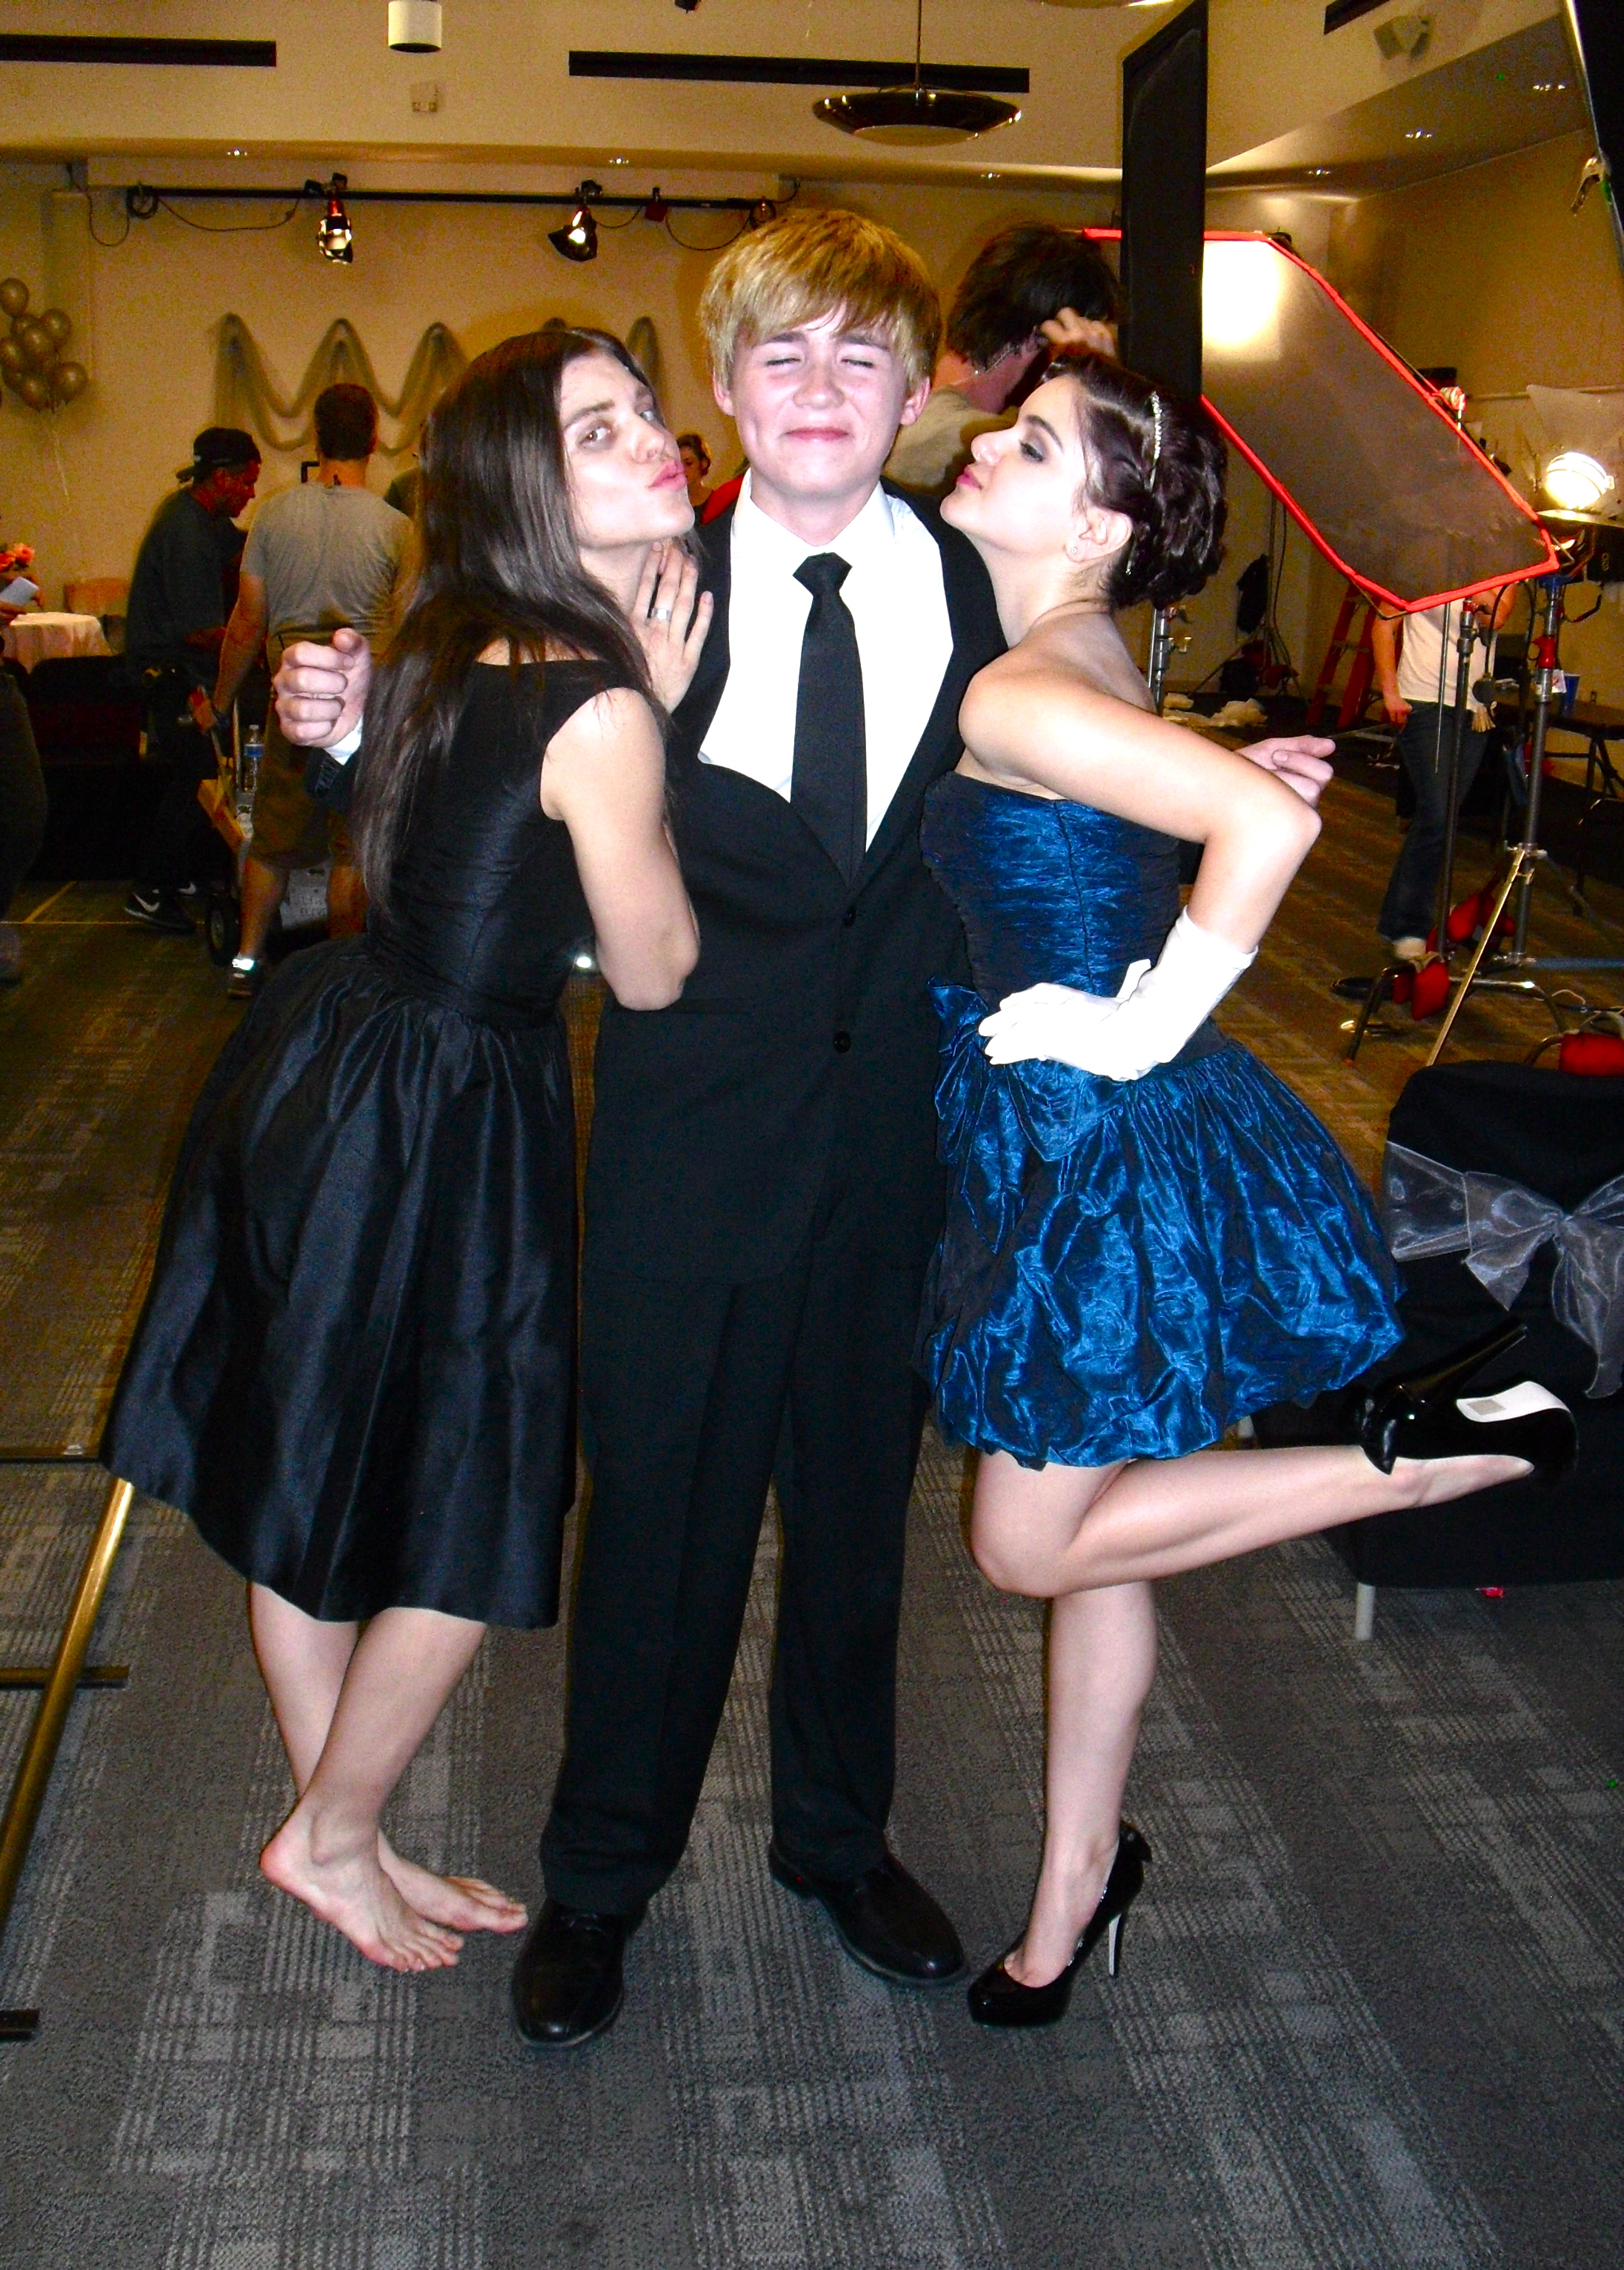 Actors Annalynne McCord, Brennan Bailey, and Ariel Winter on the set of Excision Los Angeles, Ca. 2012